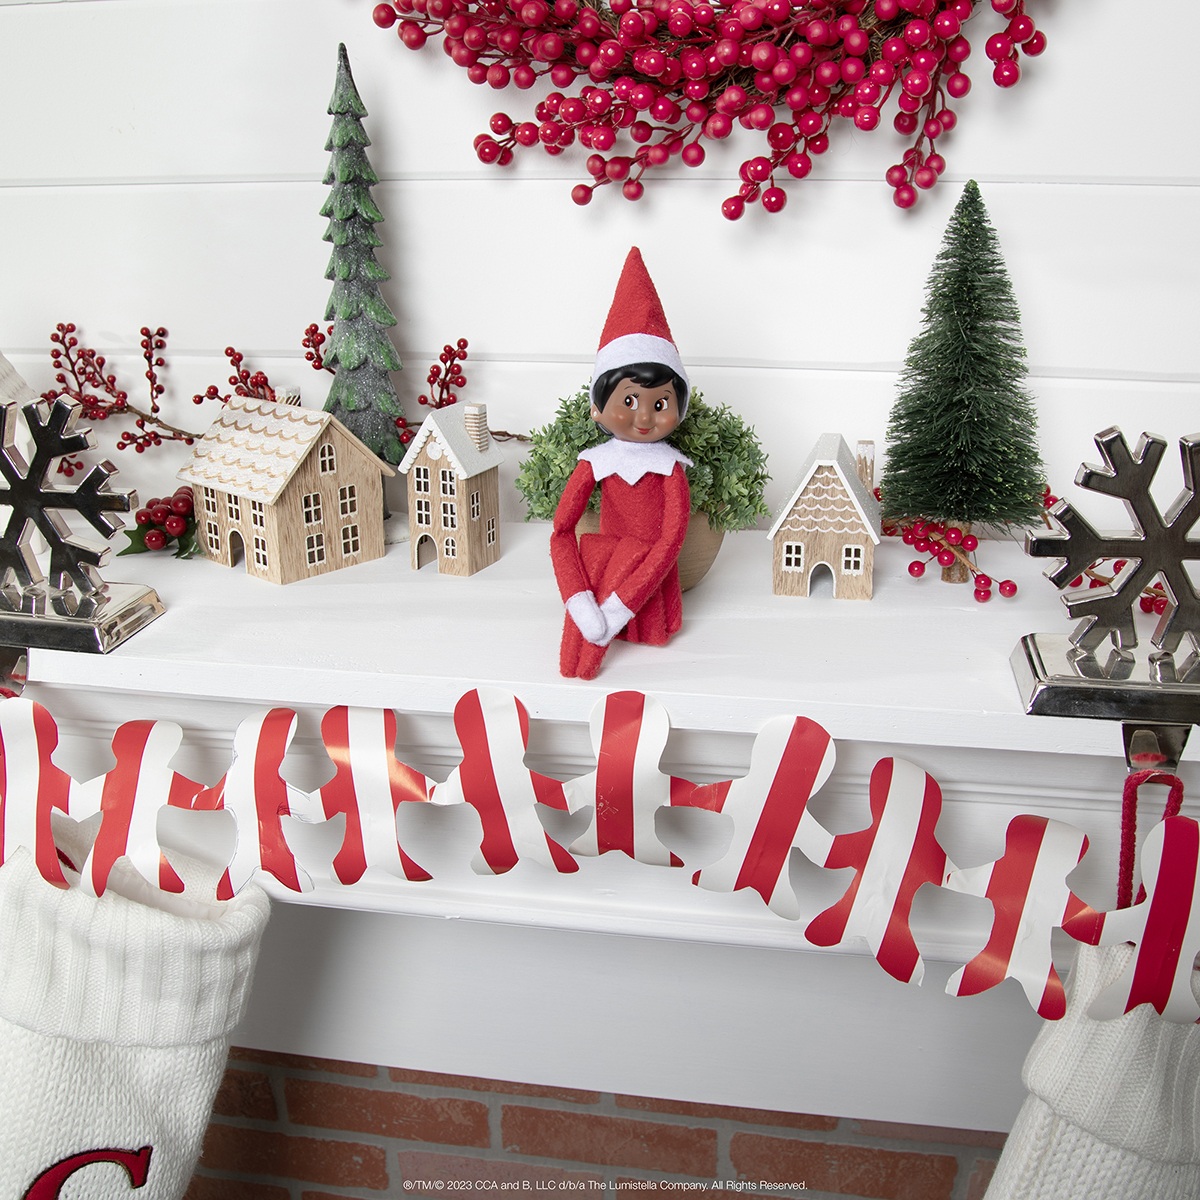 The Elf on the Shelf sitting on a fireplace mantle with garland made from gift-wrapping paper.